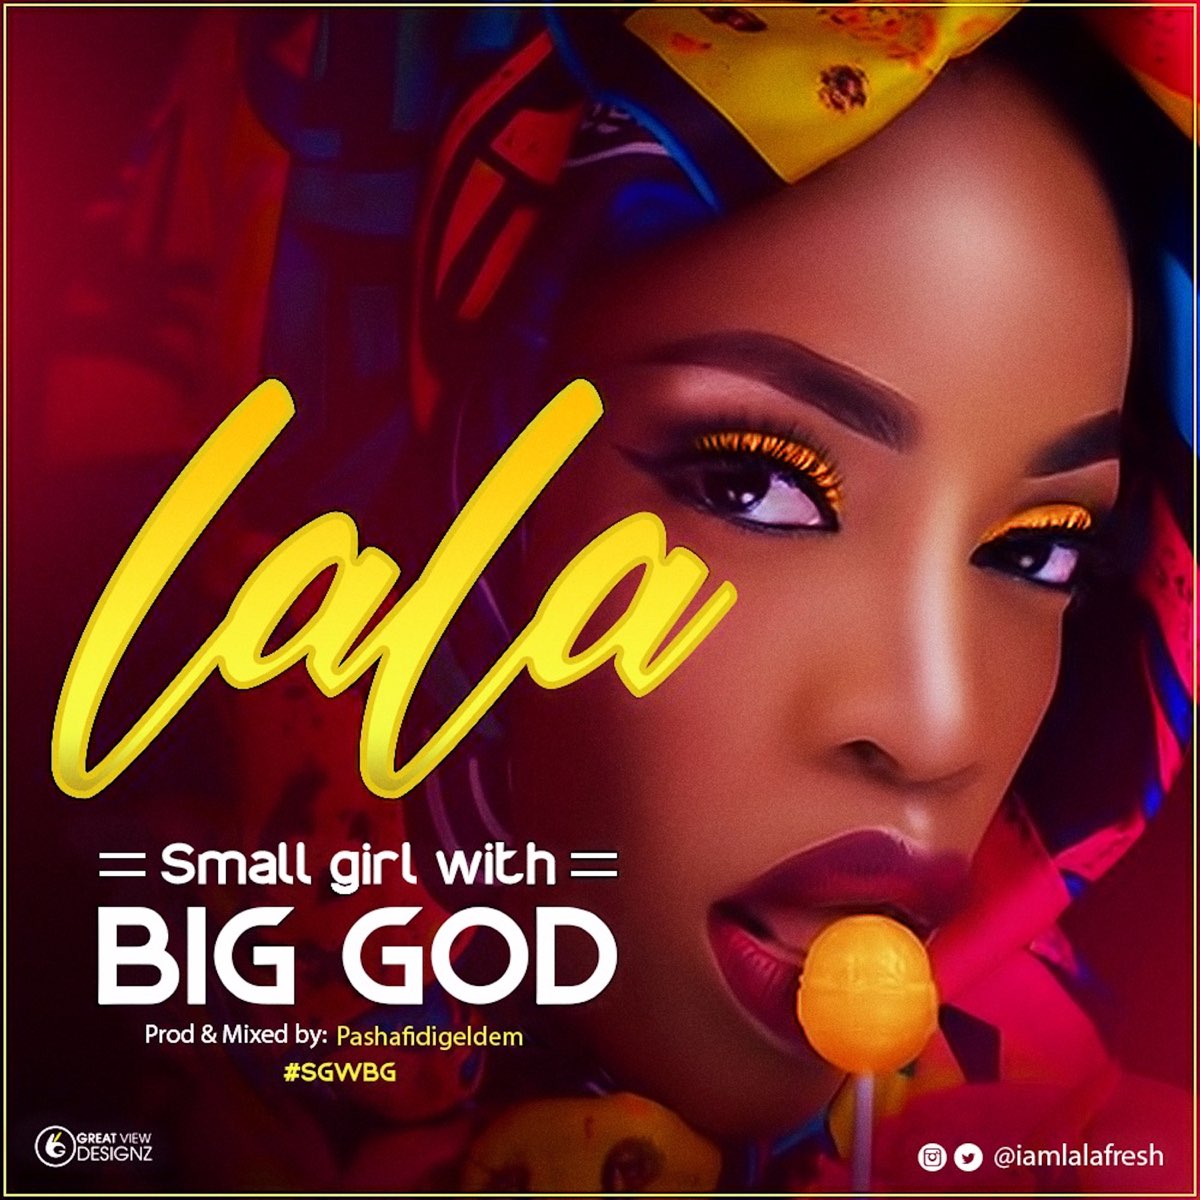 Small Girl With Big God - Single by Lala on Apple Music